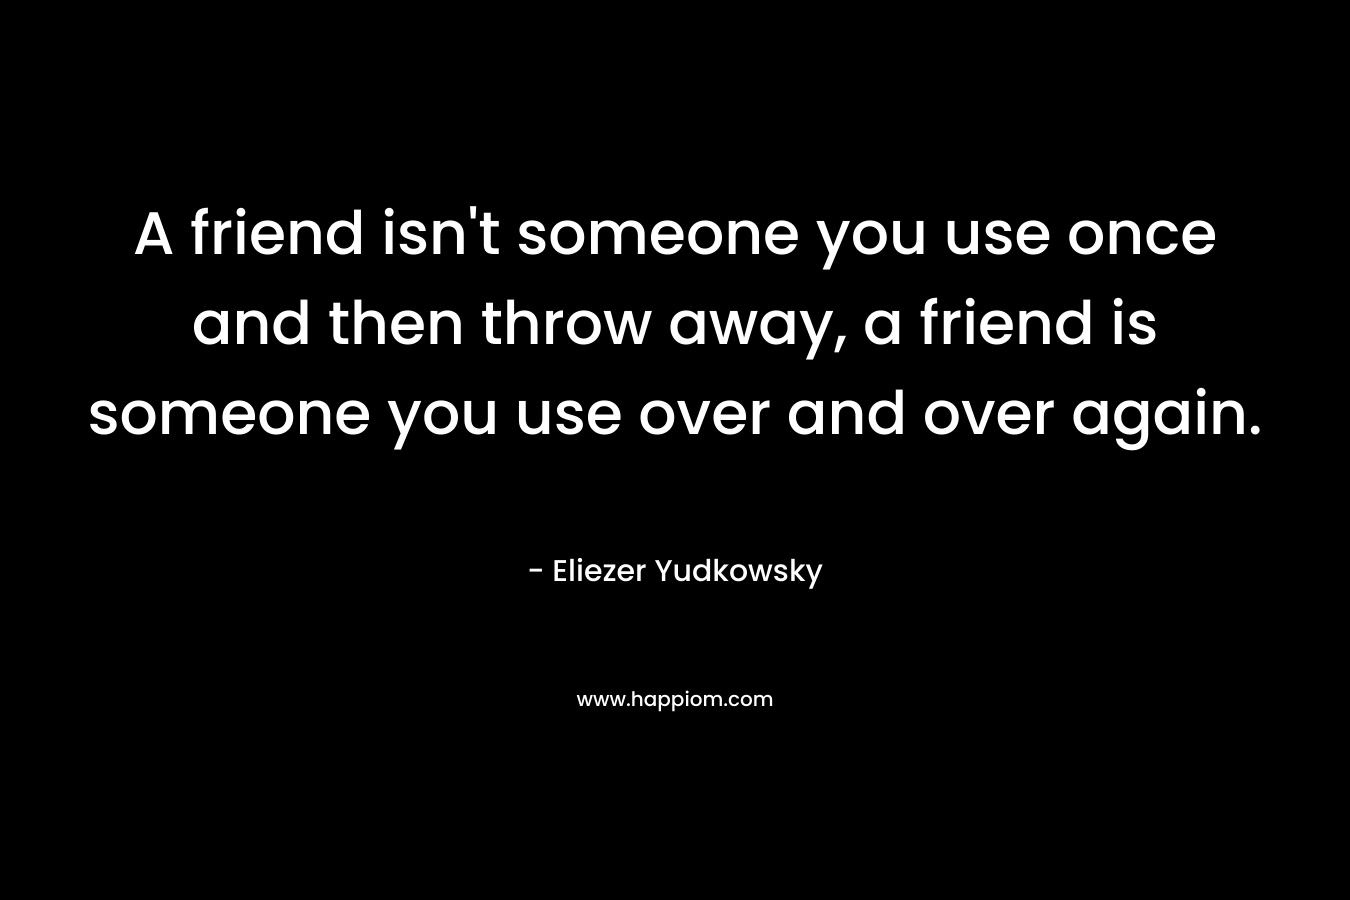 A friend isn’t someone you use once and then throw away, a friend is someone you use over and over again. – Eliezer Yudkowsky